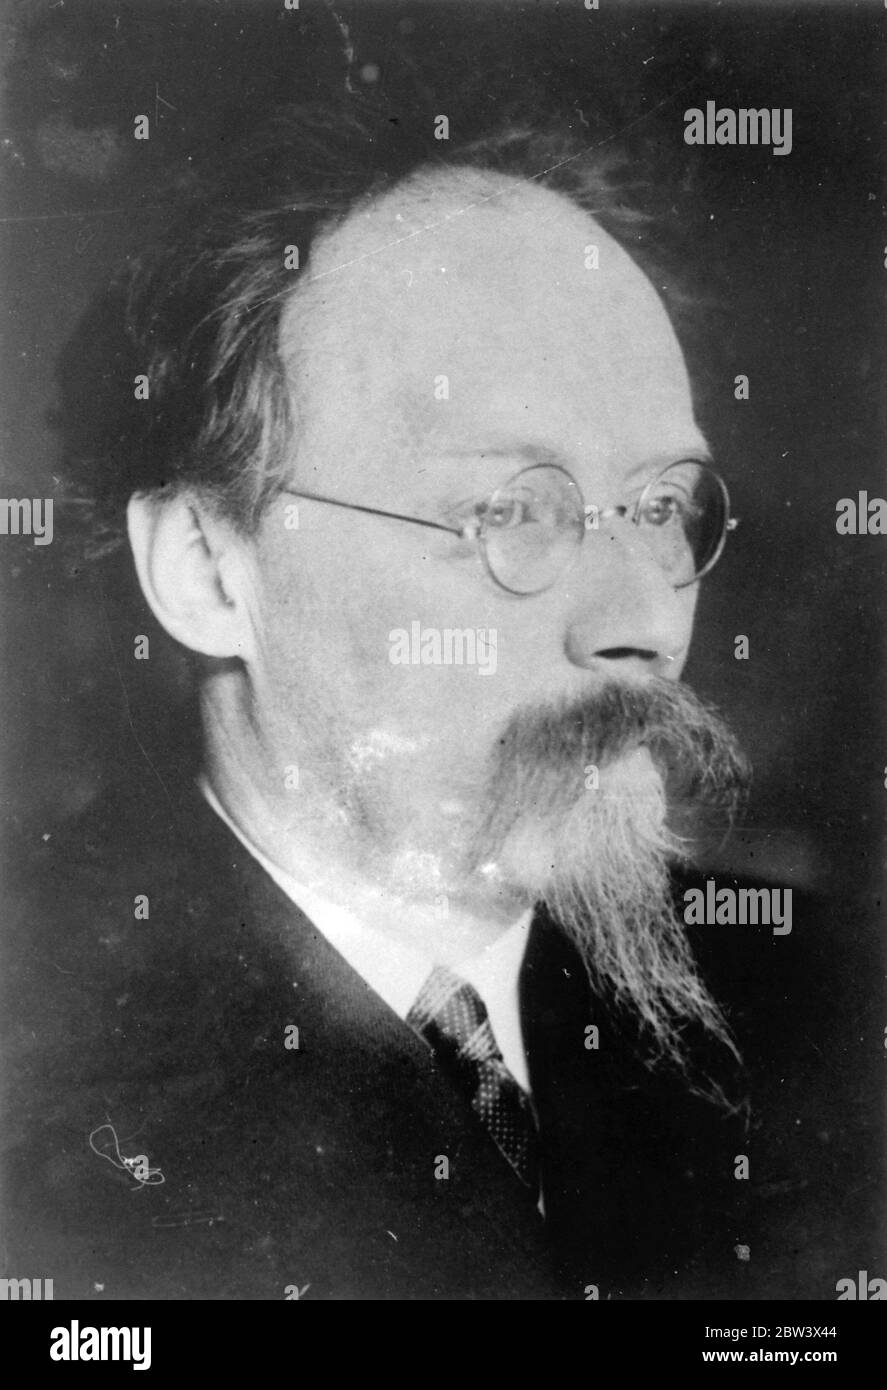 Soviet banking expert in danger of arrest , after terrorist trial revelations . The arrest is expected at any hour of Y. L. Piatakov , chief banking expert of the Soviet Union , as a result of the Zinoviev Kamenev trial in Moscow . It has been definitely proved that Piatakov was intimately associated with Leon Trotsky , exiled Bolshevist leader who is alleged to be behind the terrorist plot . Photo shows , M Pintakov . 23 August 1936 Original caption from negative Stock Photo